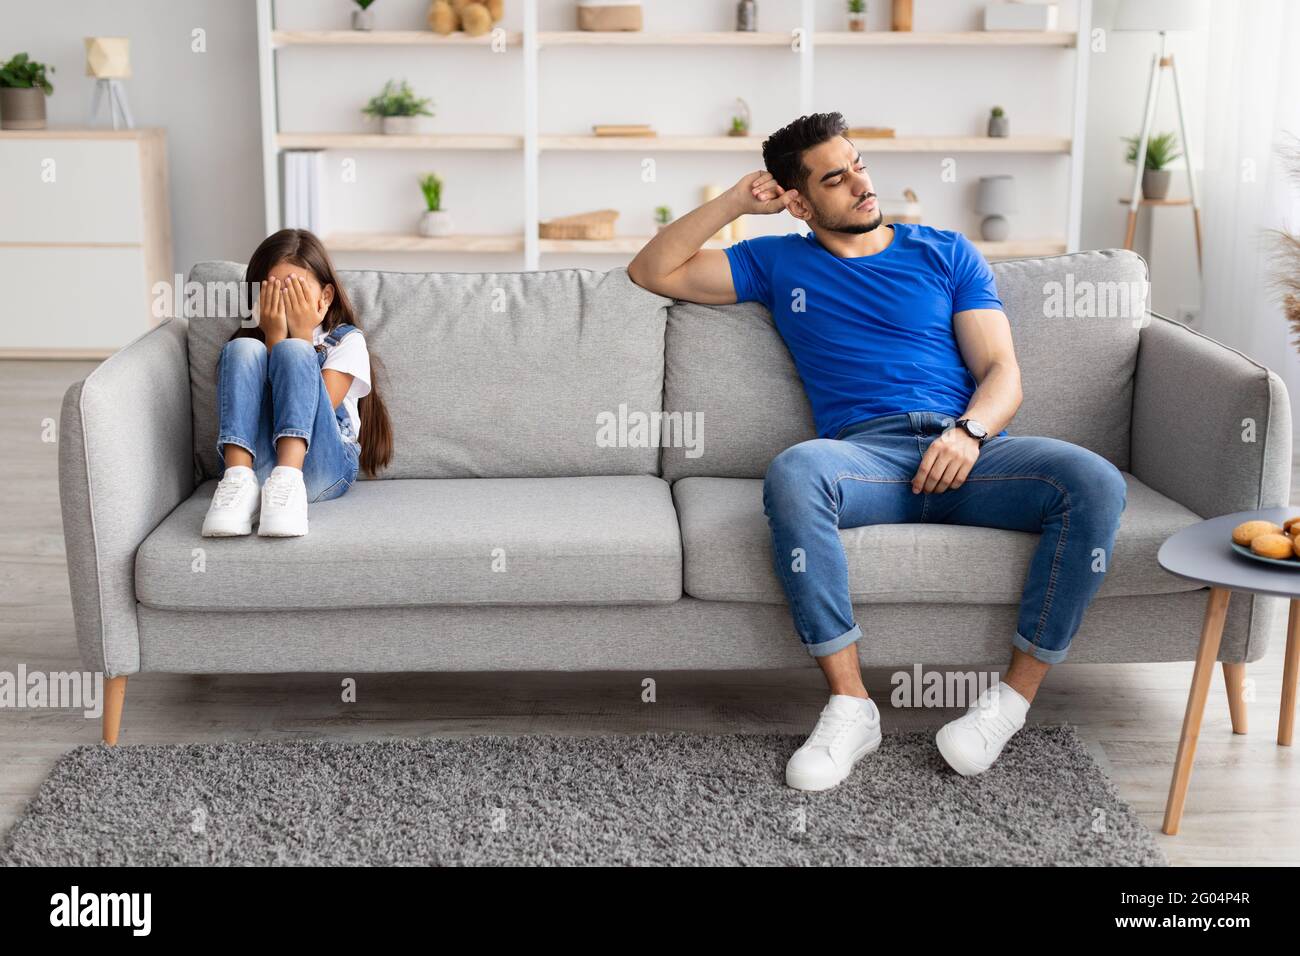 Father sitting separate on couch with offended crying daughter Stock Photo